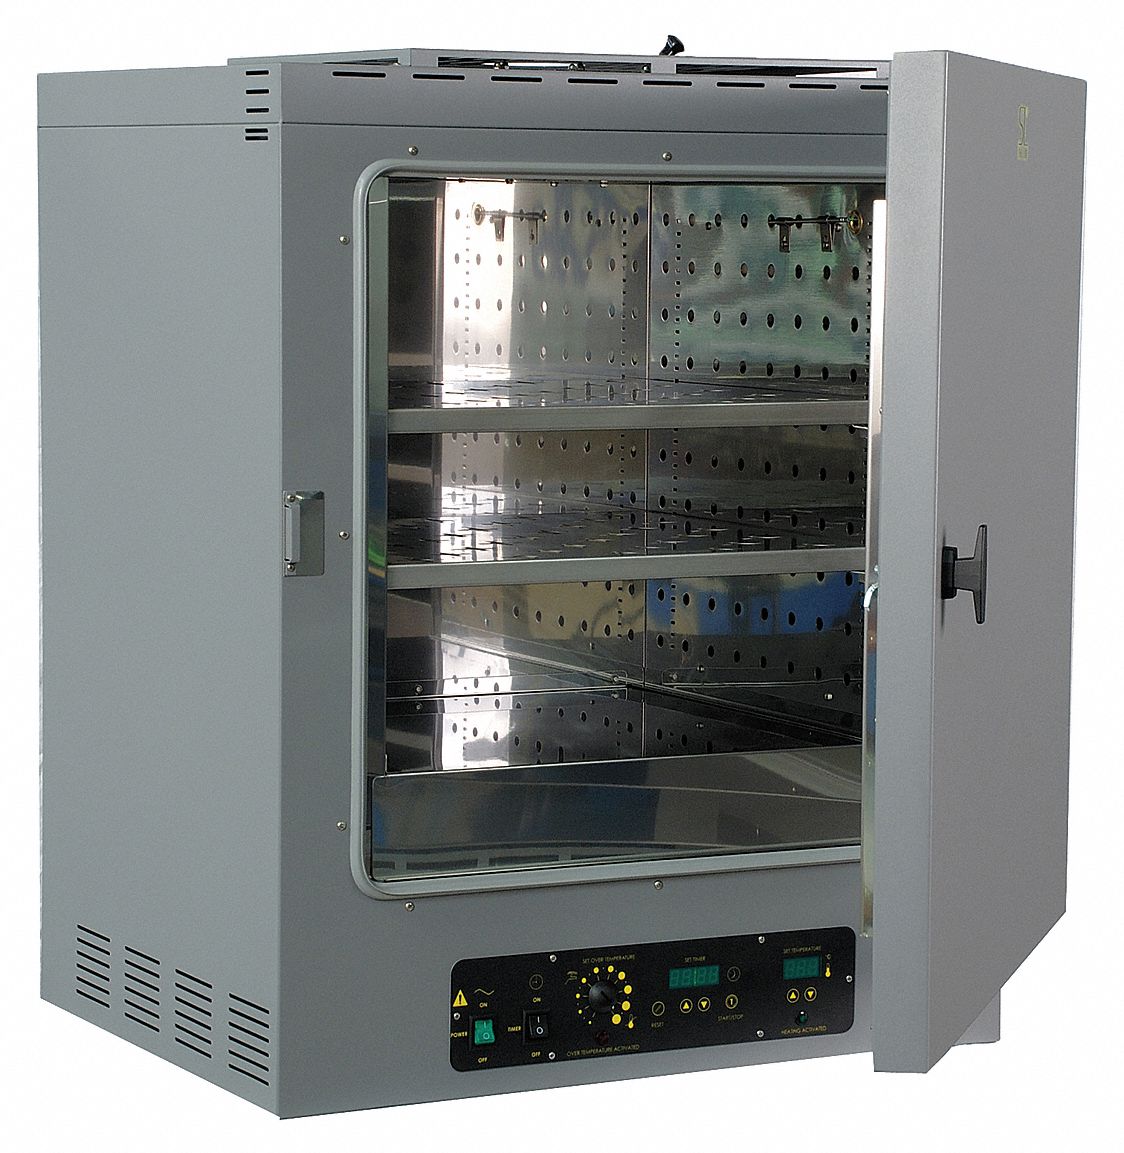 Oven: 15° to 225°, 3.4 Capacity (Cu.-Ft.), 35.5 in Overall Ht, 26 in Overall Wd